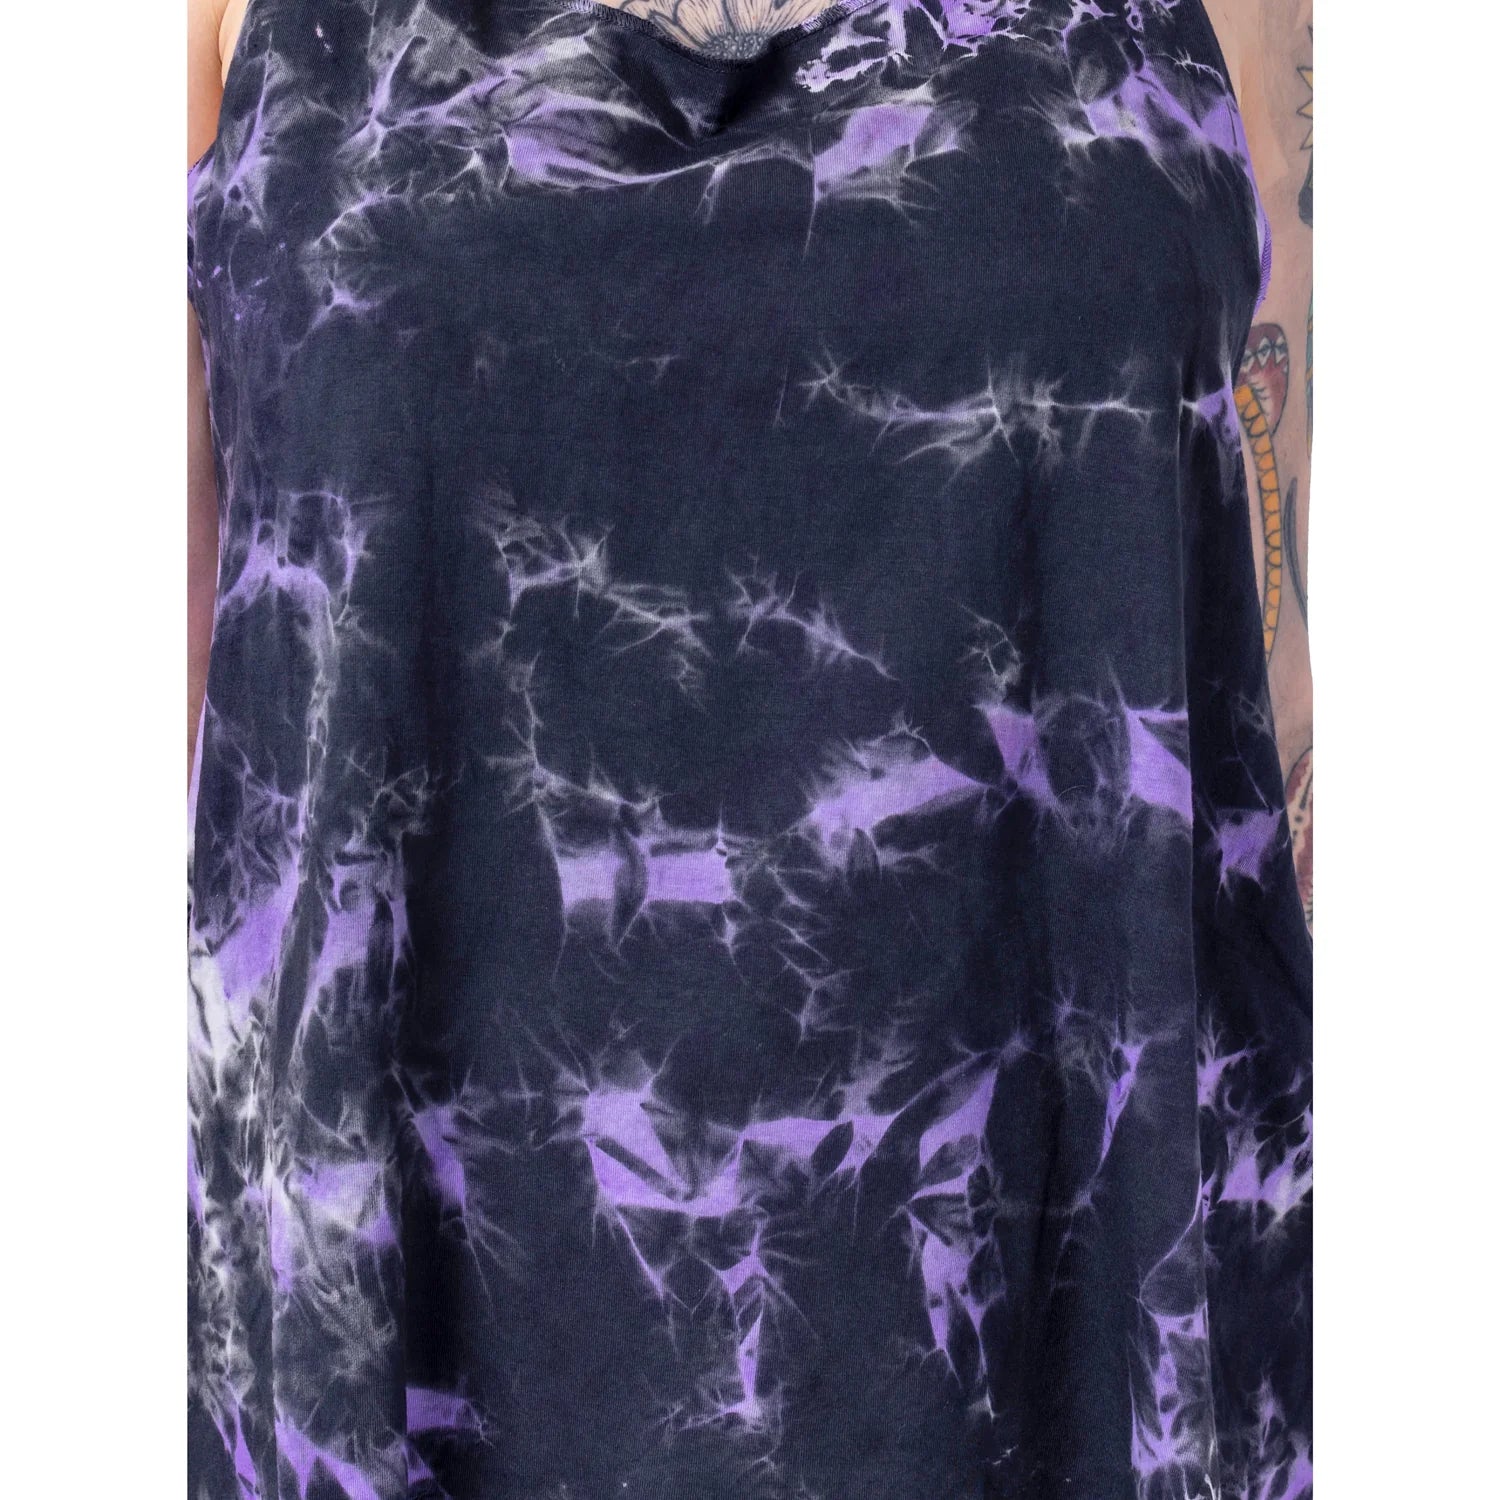 Innocent Lifestyle Black and Purple Tie Dye Tye Knot Top - Kate's Clothing